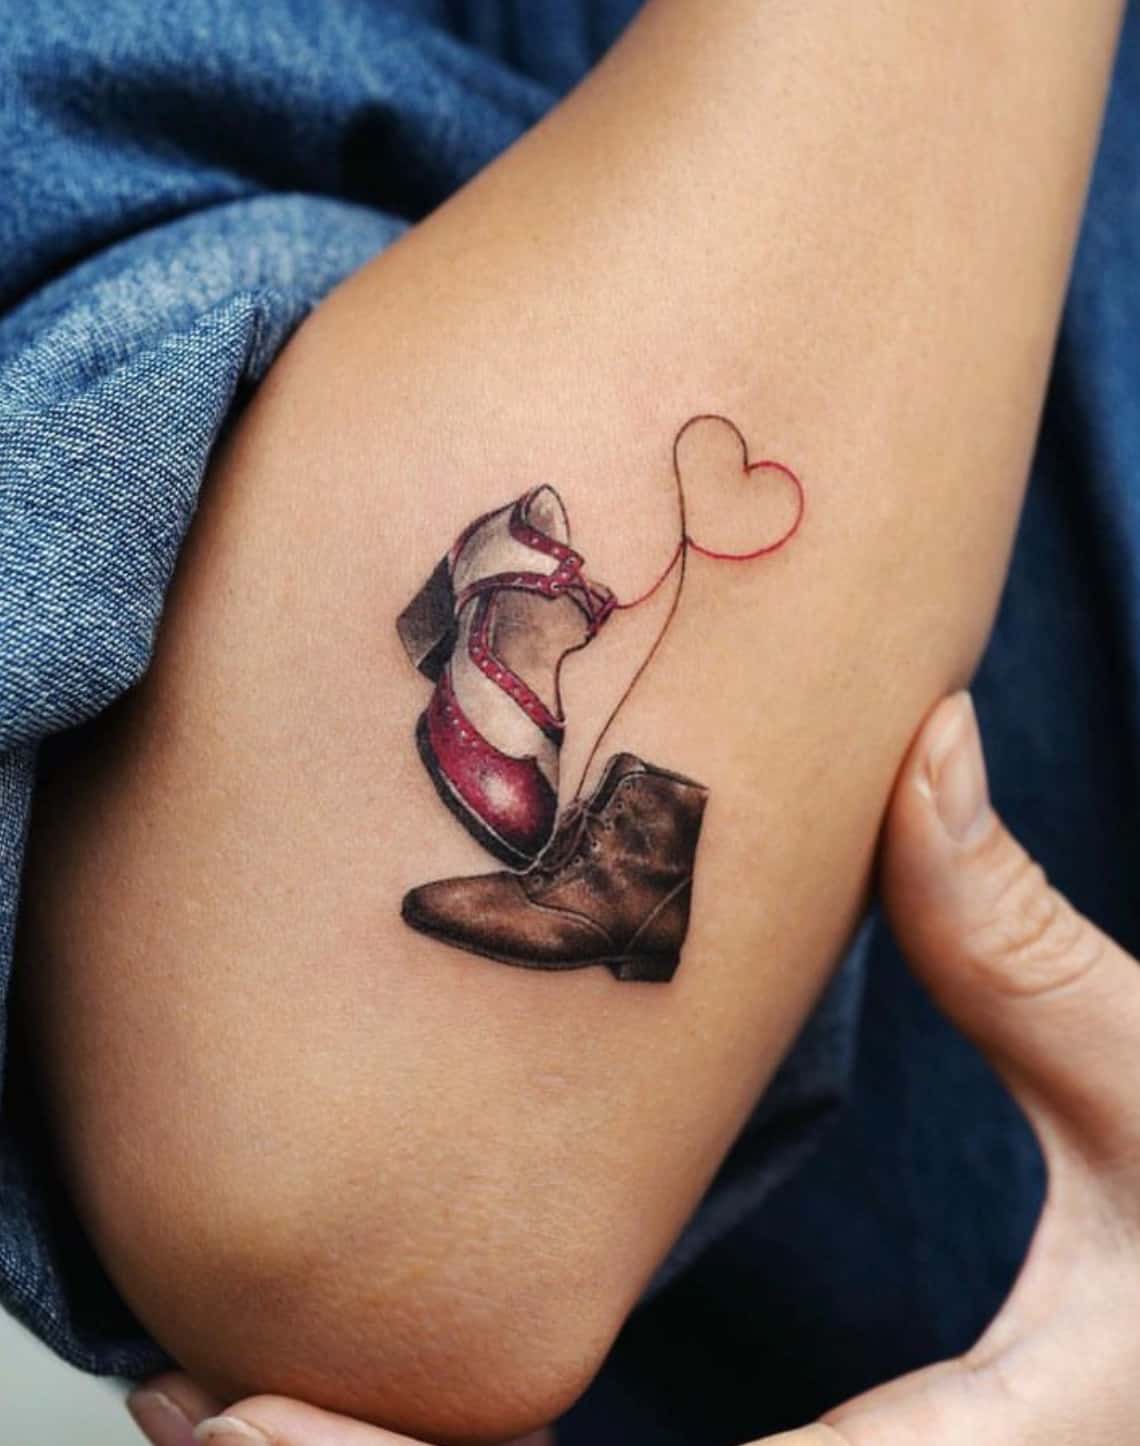 Is tattooing shoes on your feet the same as wearing actual shoes? - Quora